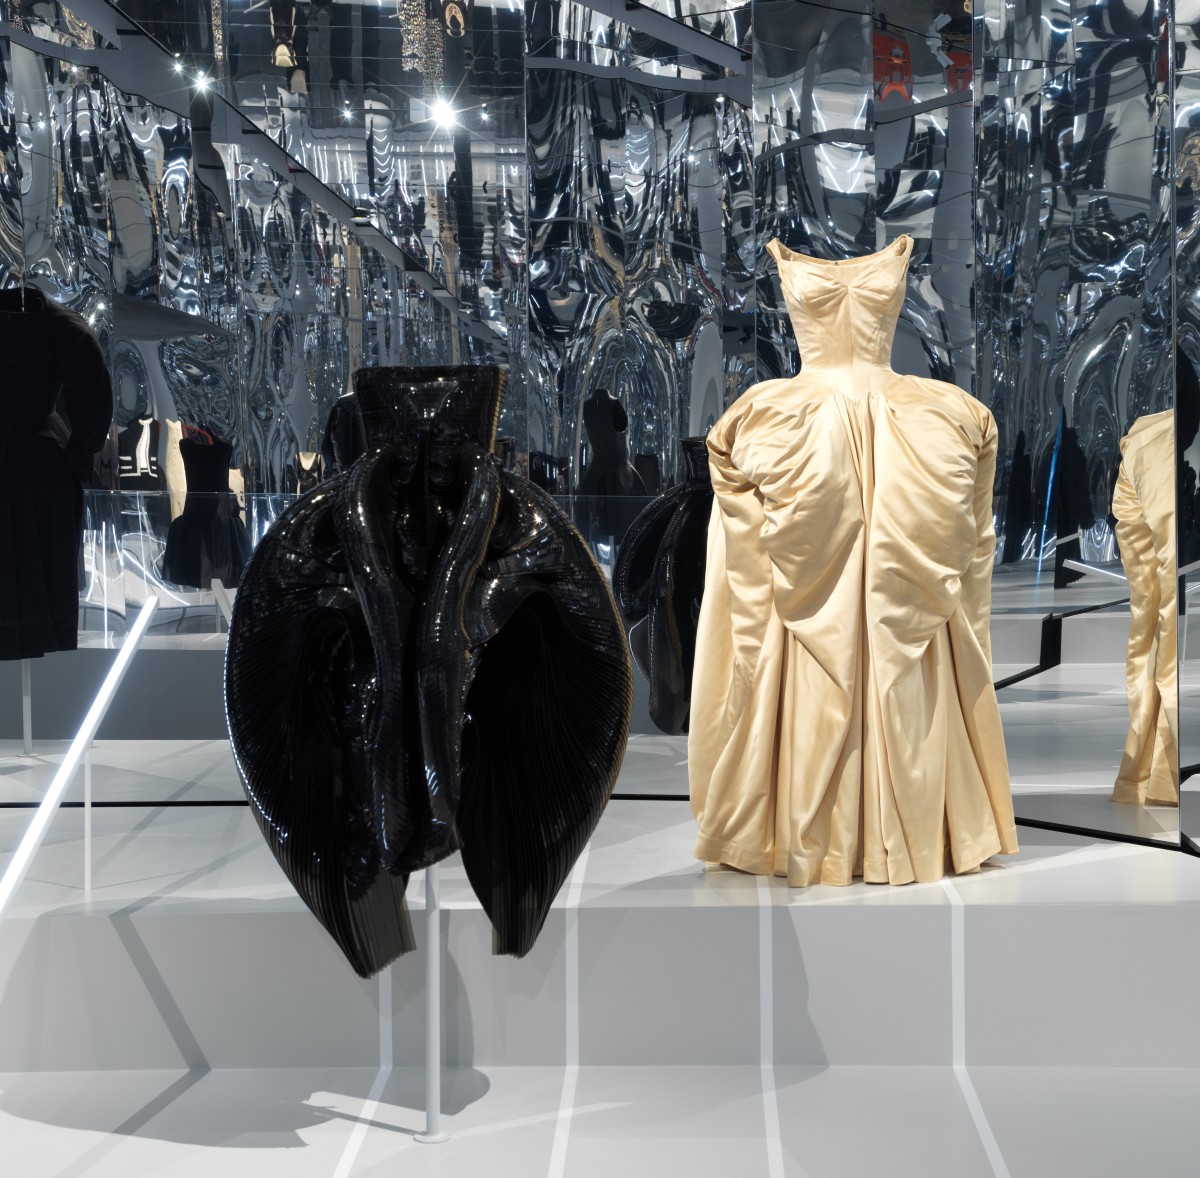 An Iris Van Herpen gown from Fall 2012, left, and a Charles James gown from 1951, right.